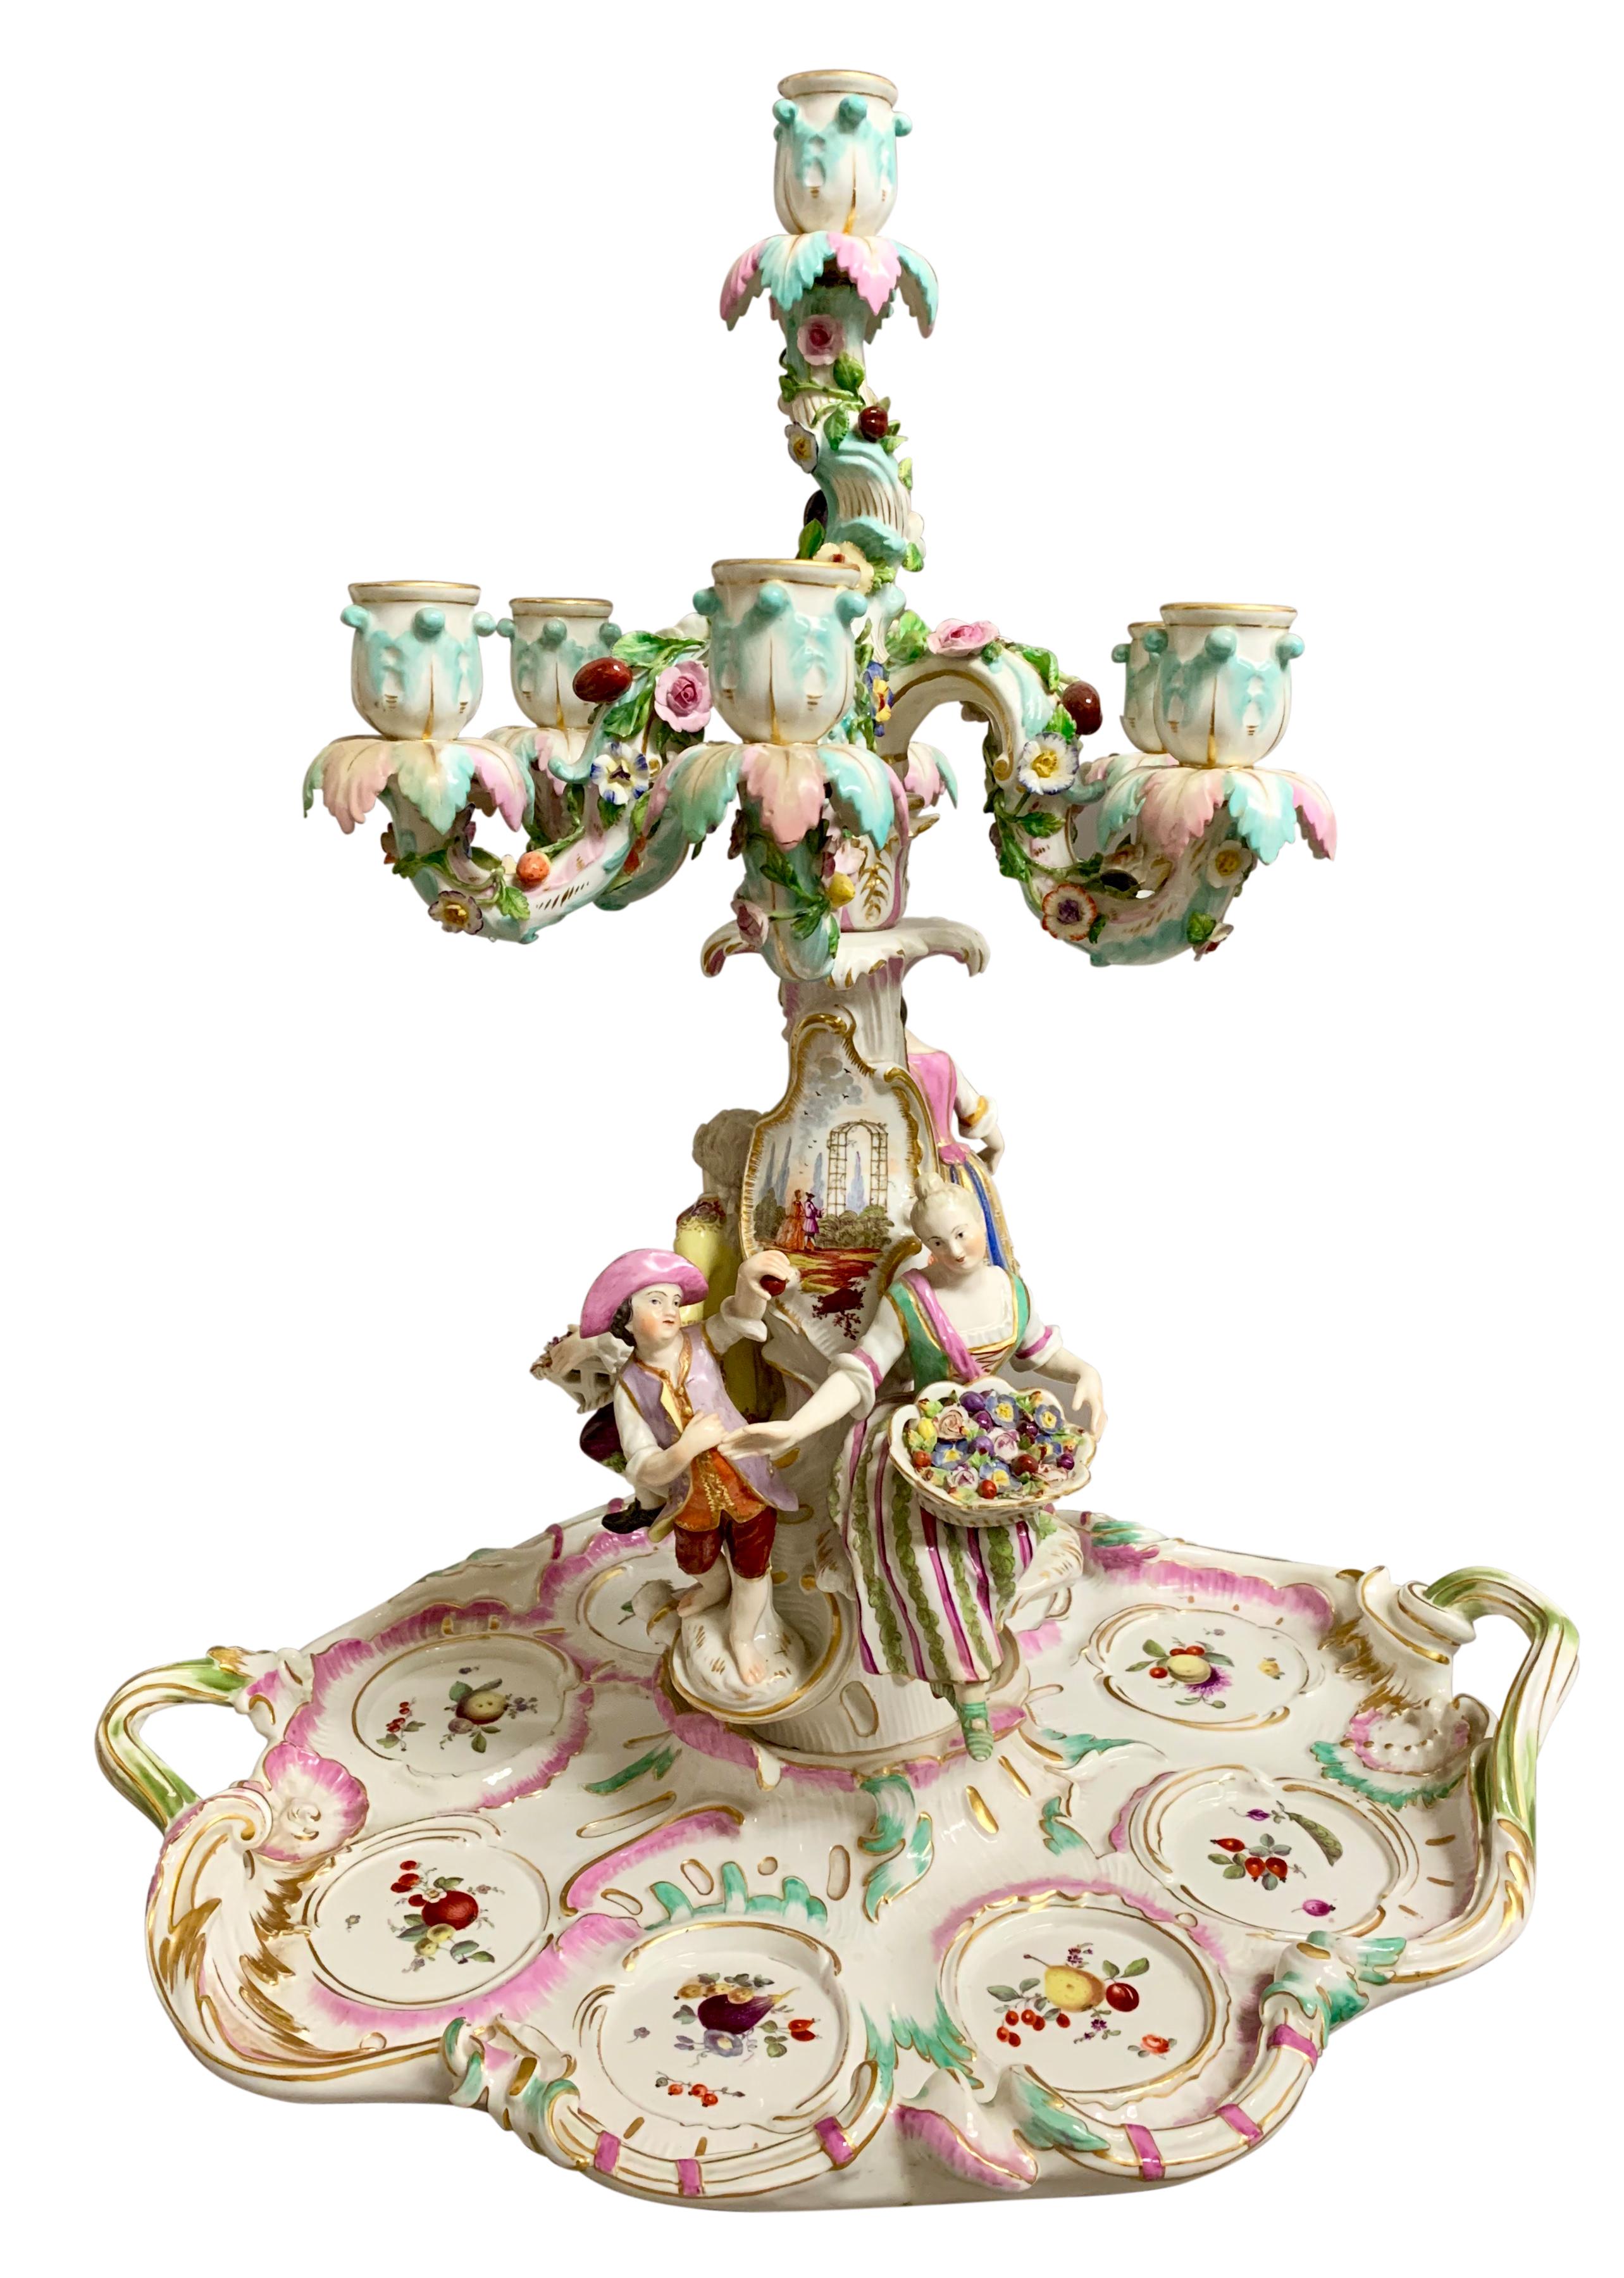 Large and impressive antique Meissen porcelain figural centerpiece. The six branch candelabra features four figures - a seated lady and a seated man each holding a basket of flowers, and a standing boy and girl. The centerpiece with colourful